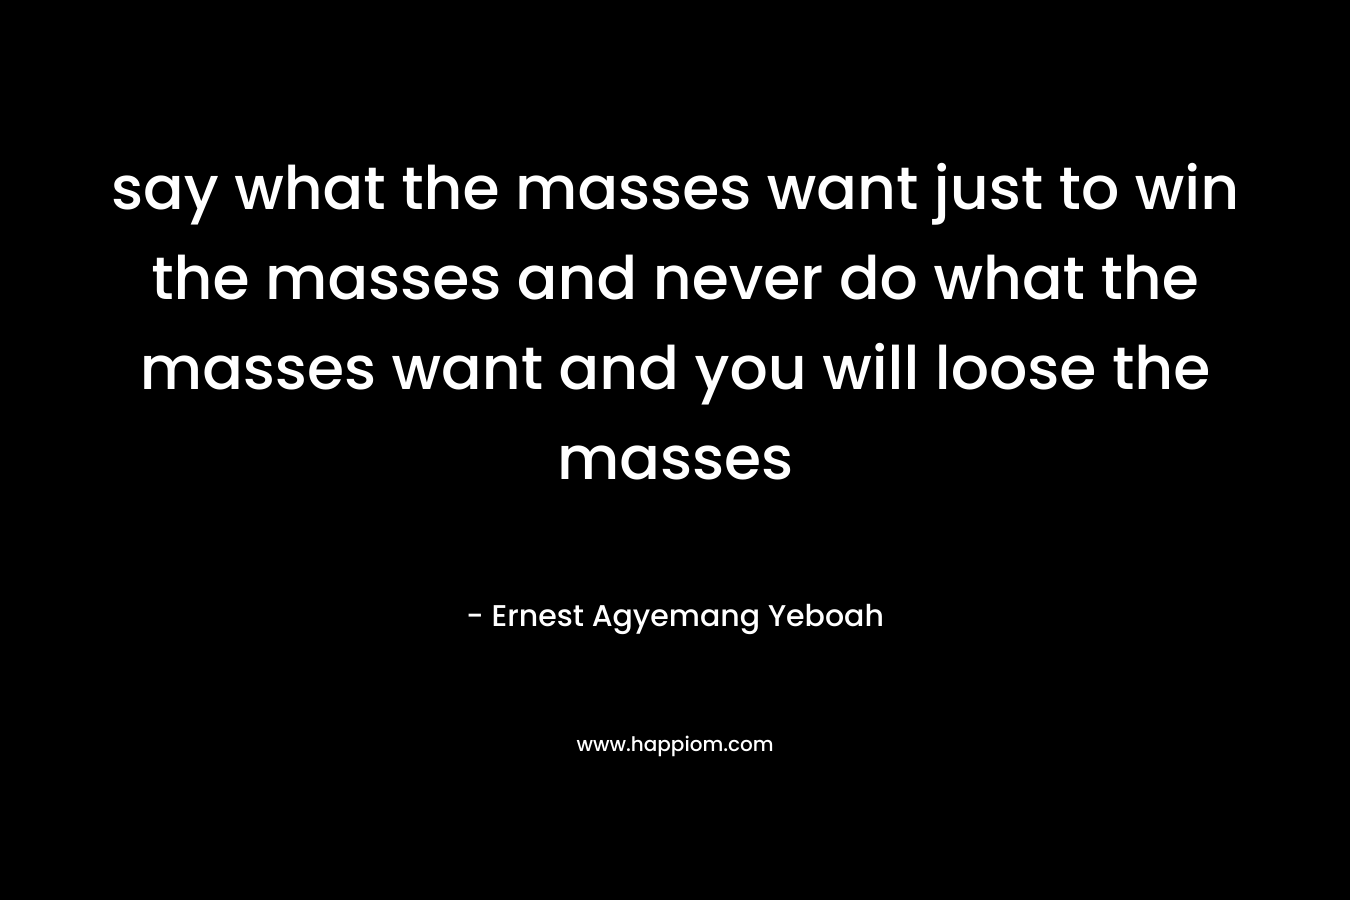 say what the masses want just to win the masses and never do what the masses want and you will loose the masses